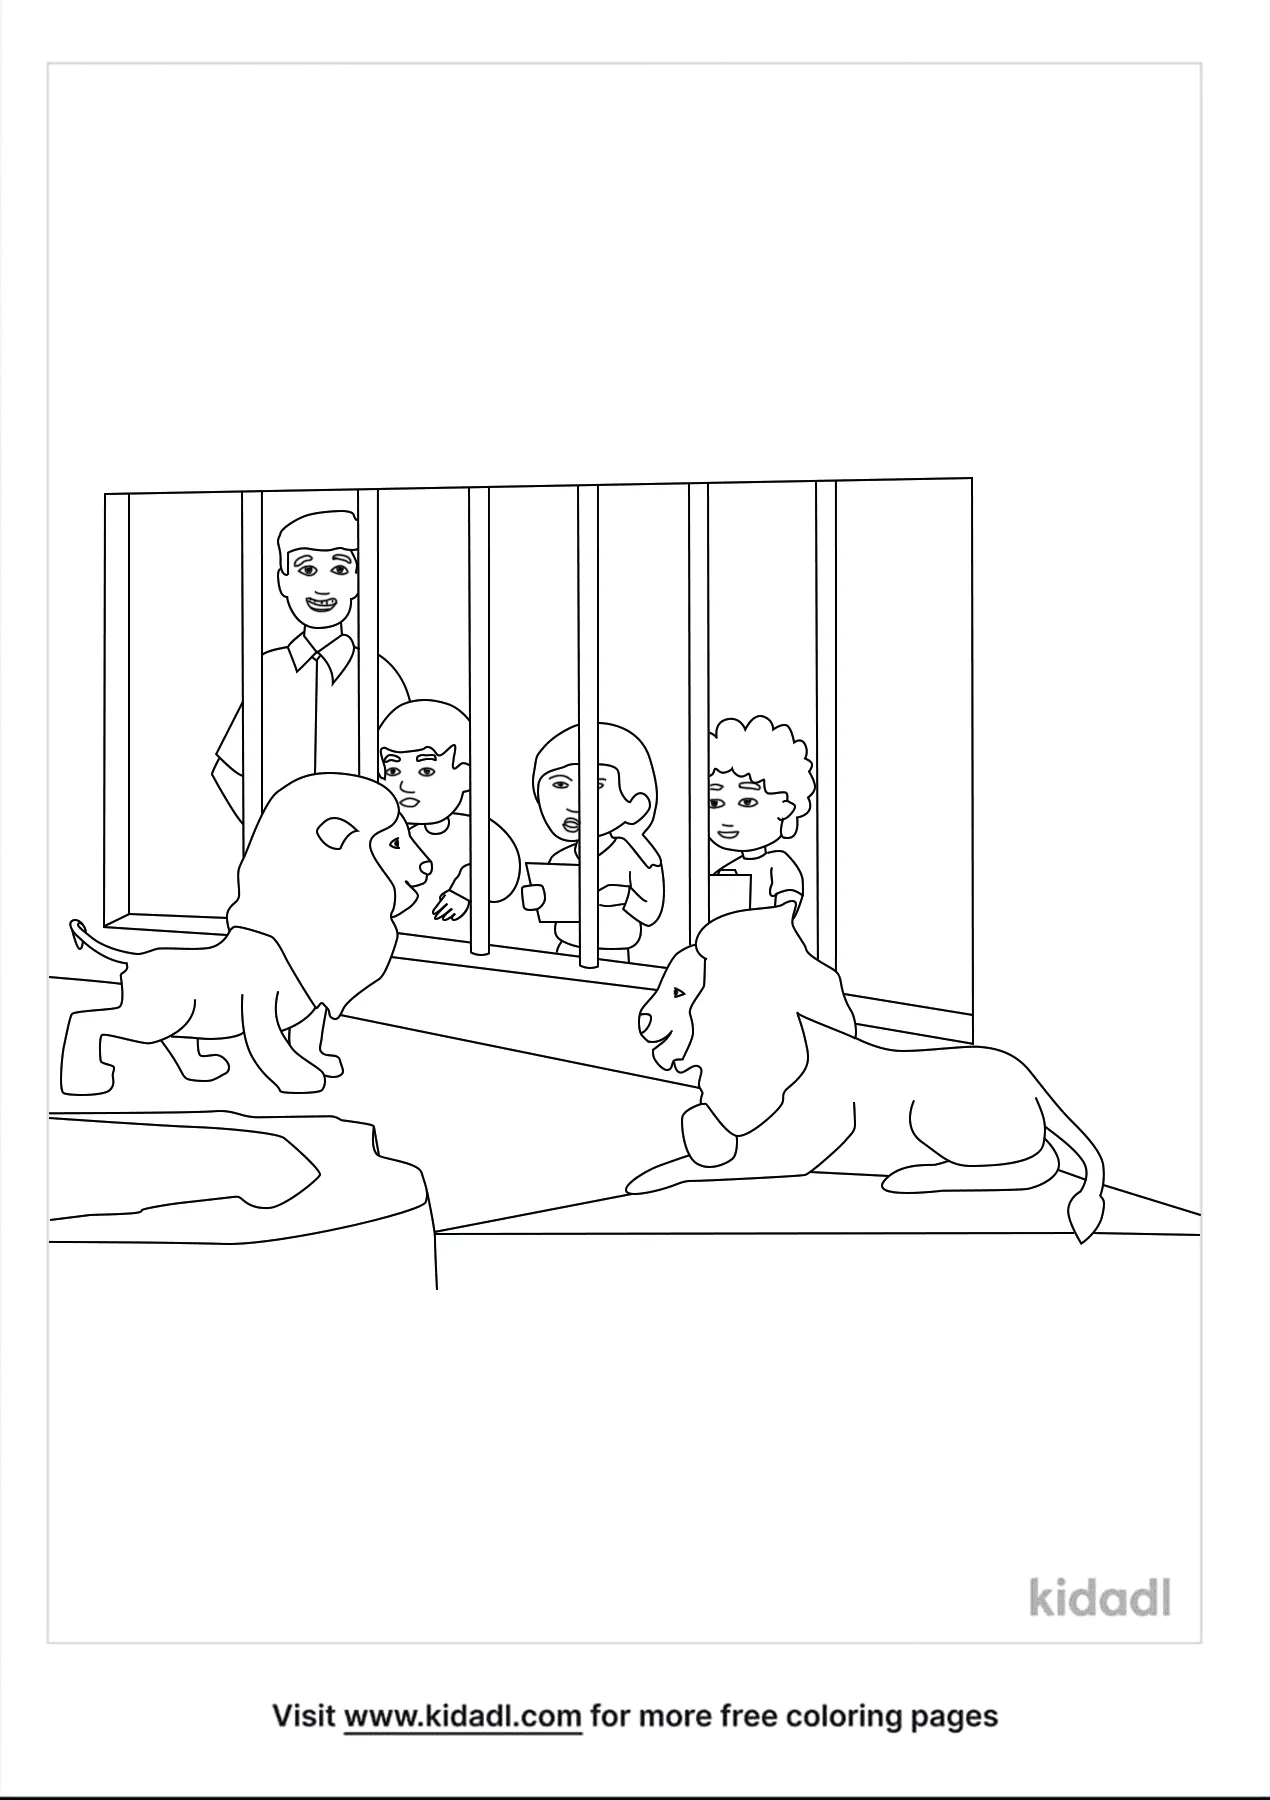 Zoo Field Trip Coloring Page